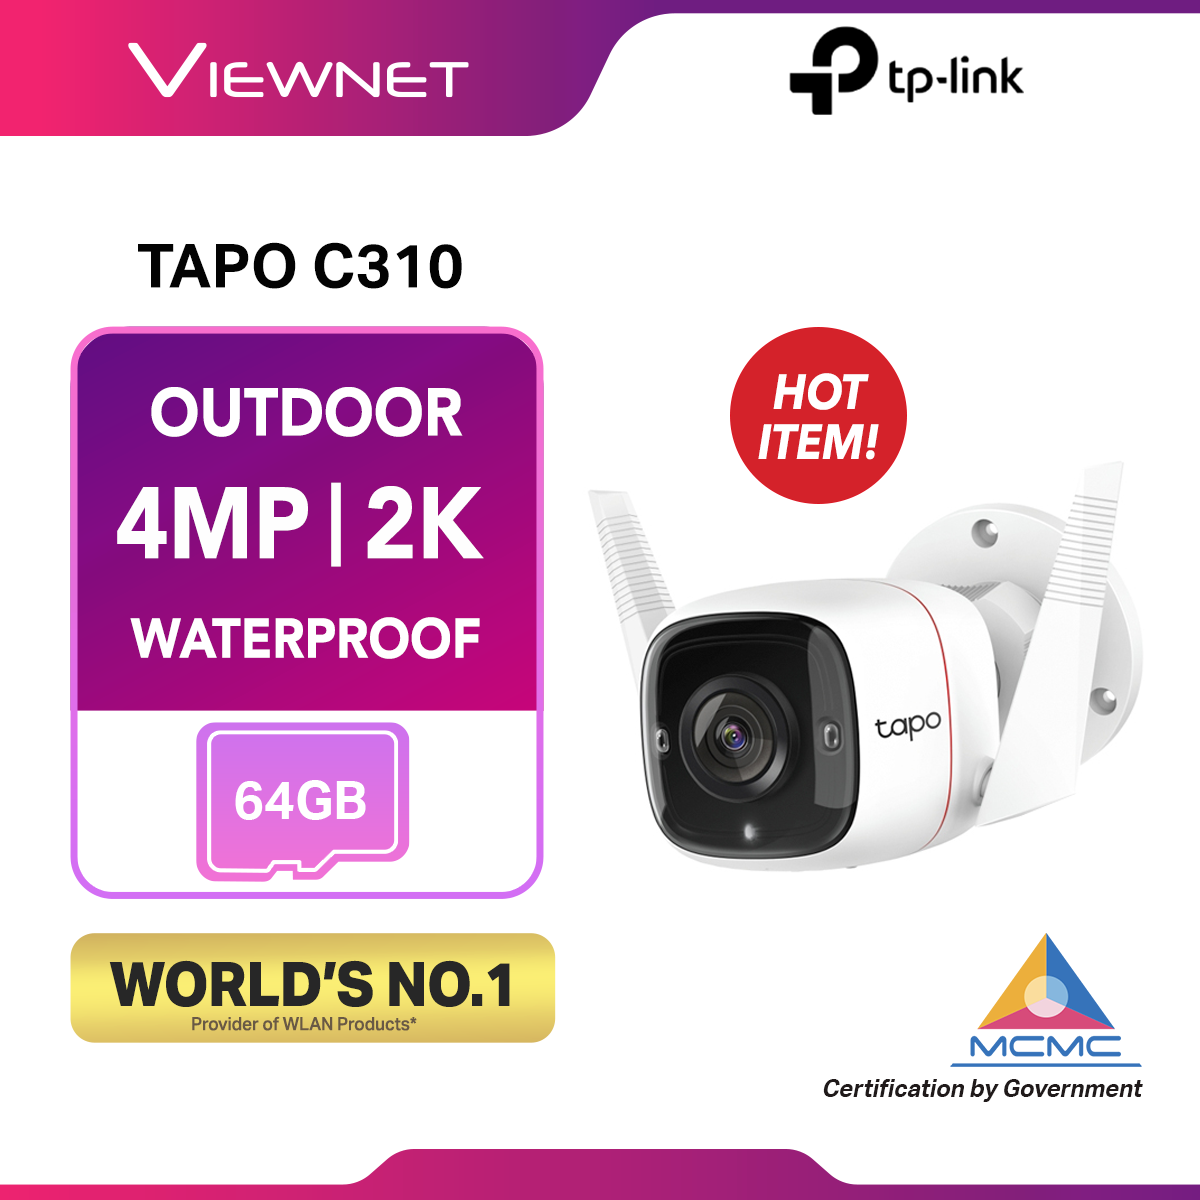 TP-Link TAPO C310 Ultra-High-Definition 3MP definition Wireless WiFi Smart Security IP Camera